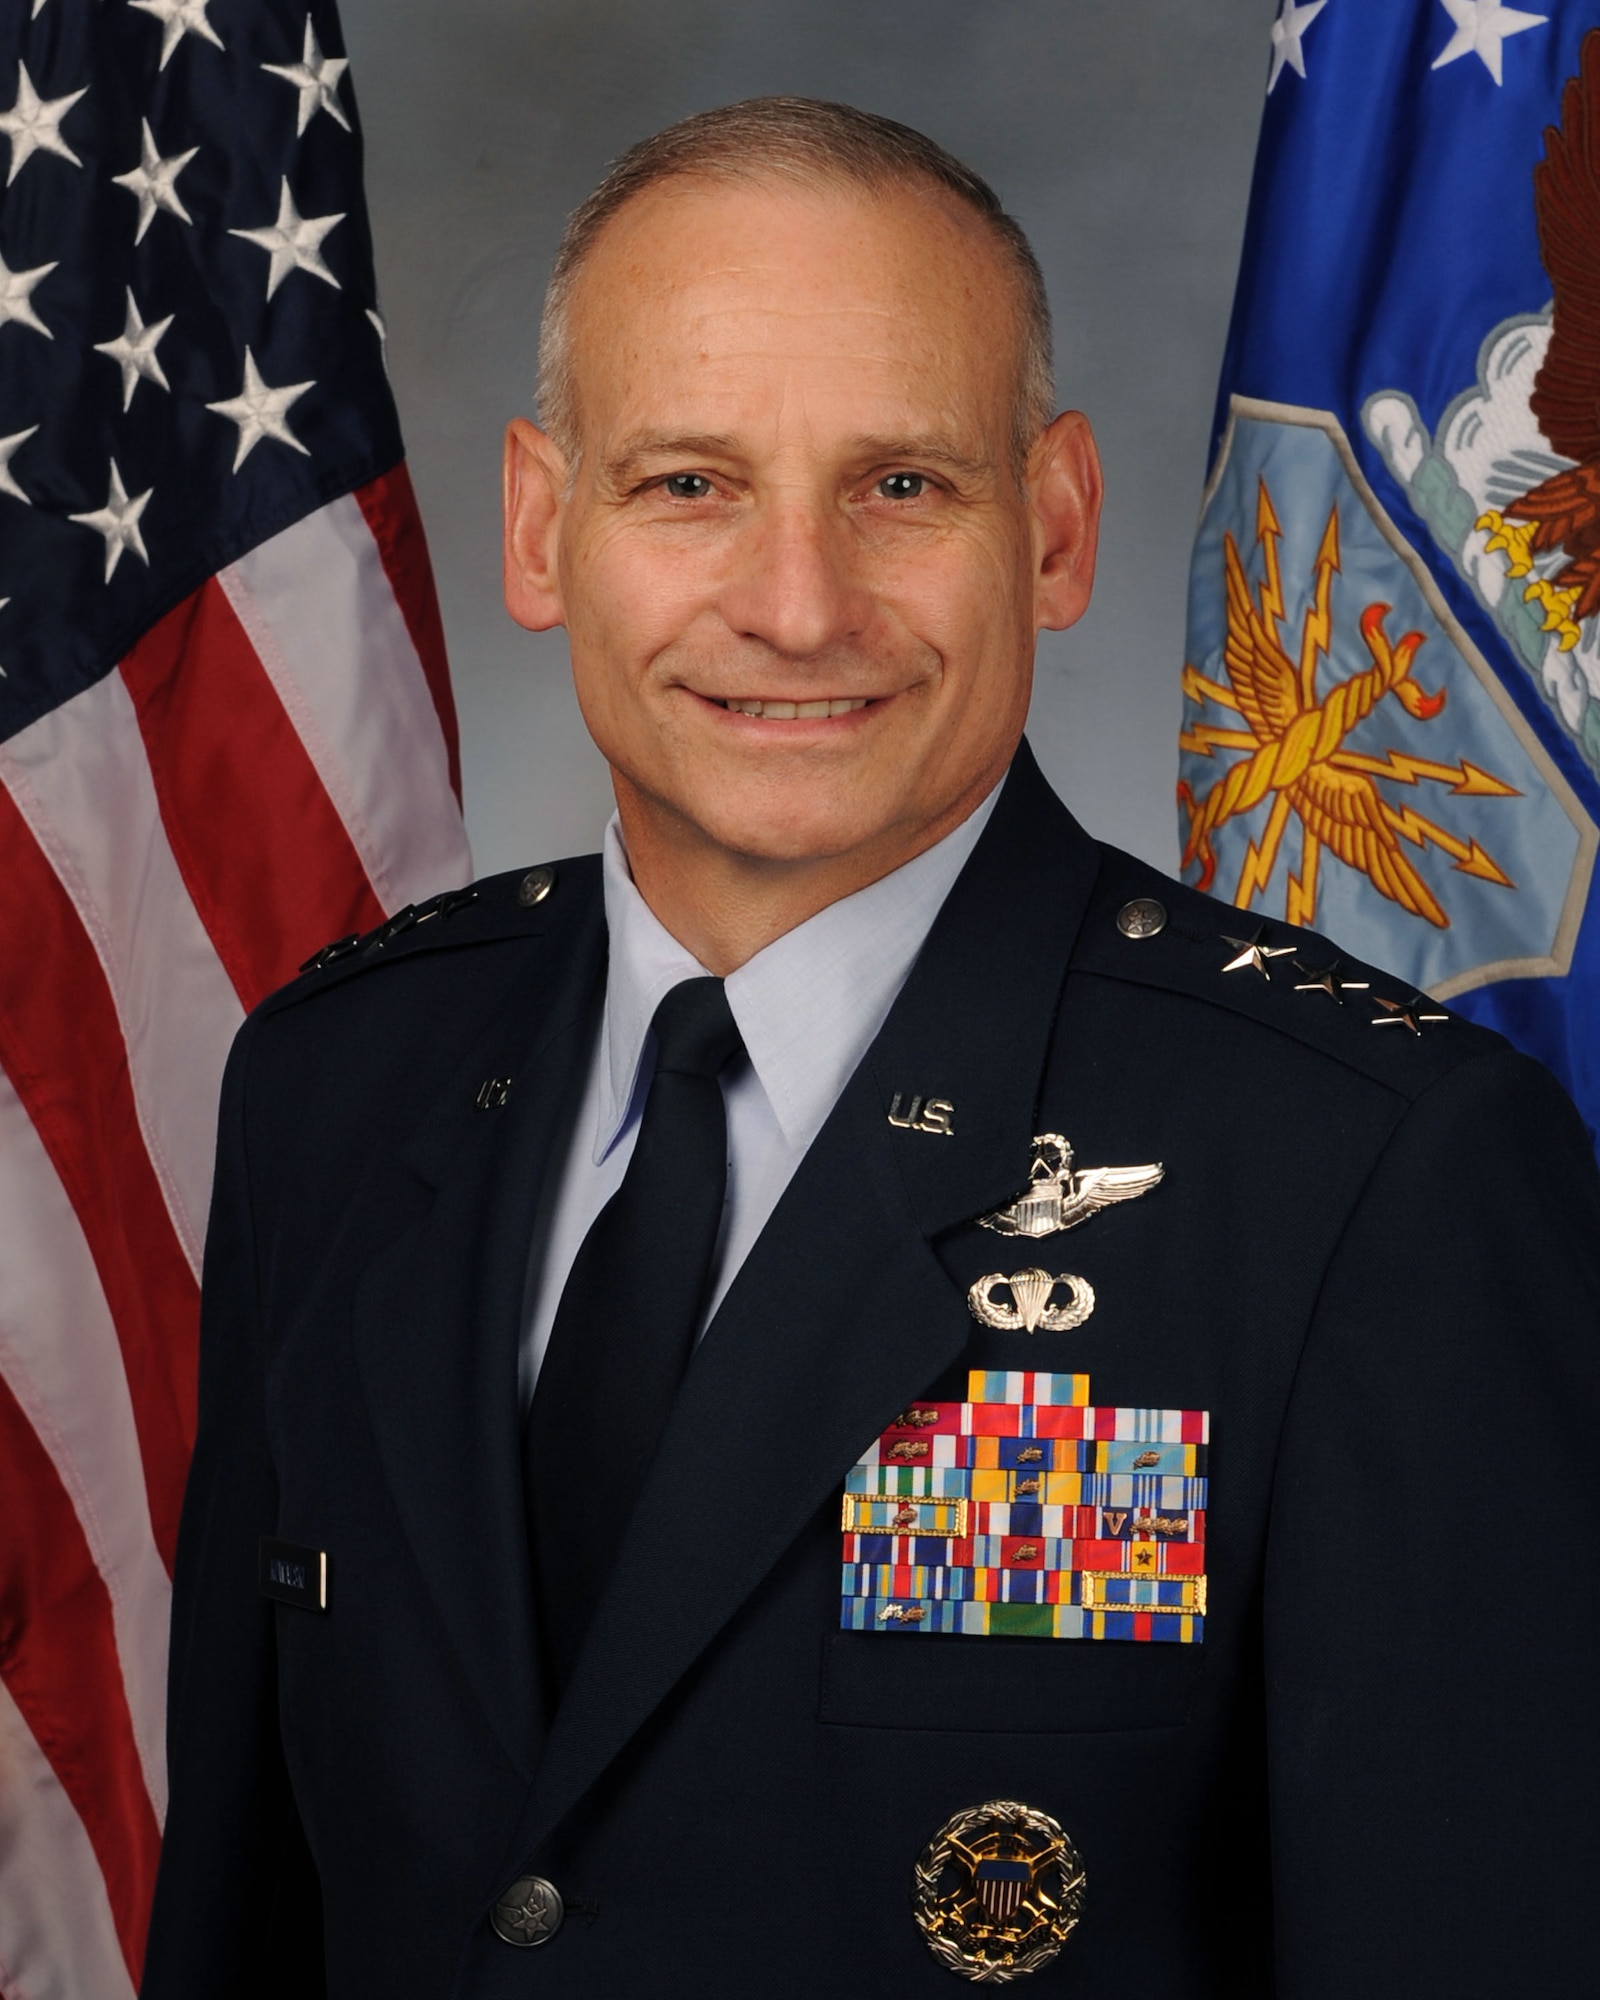 MINOT AIR FORCE BASE, N.D.--Lt. Gen. James Kowalski, commander of Air Force Global Strike Command, visited Minot AFB Jan 10 to speak with Airmen here and reaffirm the importance of Team Minot's mission.